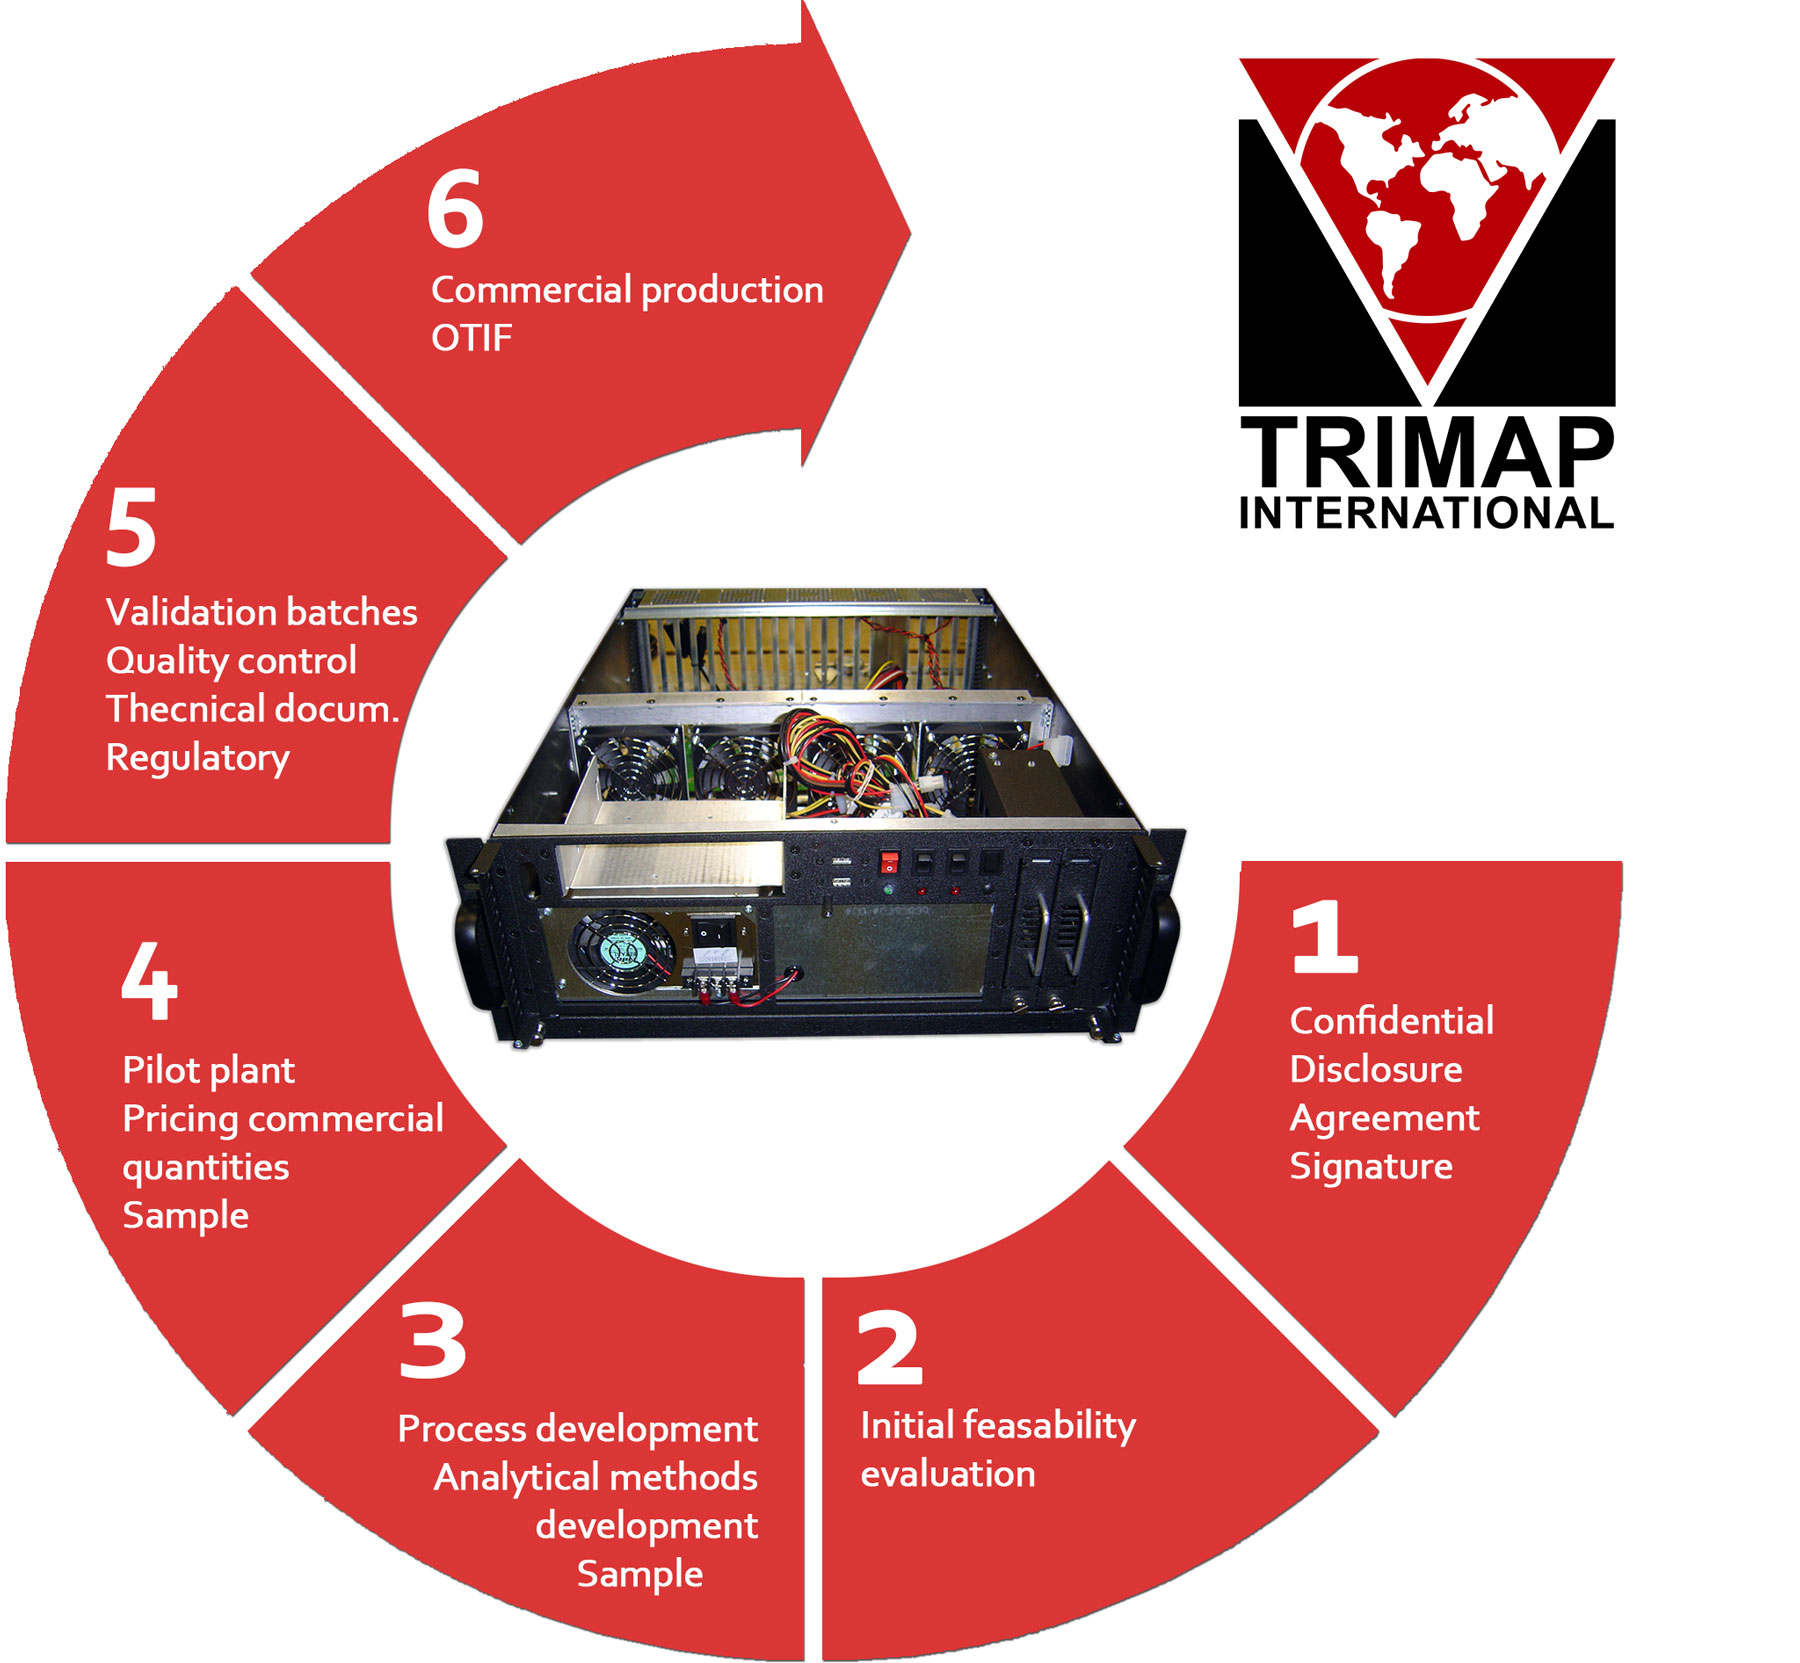 contract manufacturing services provided by TRIMAP International